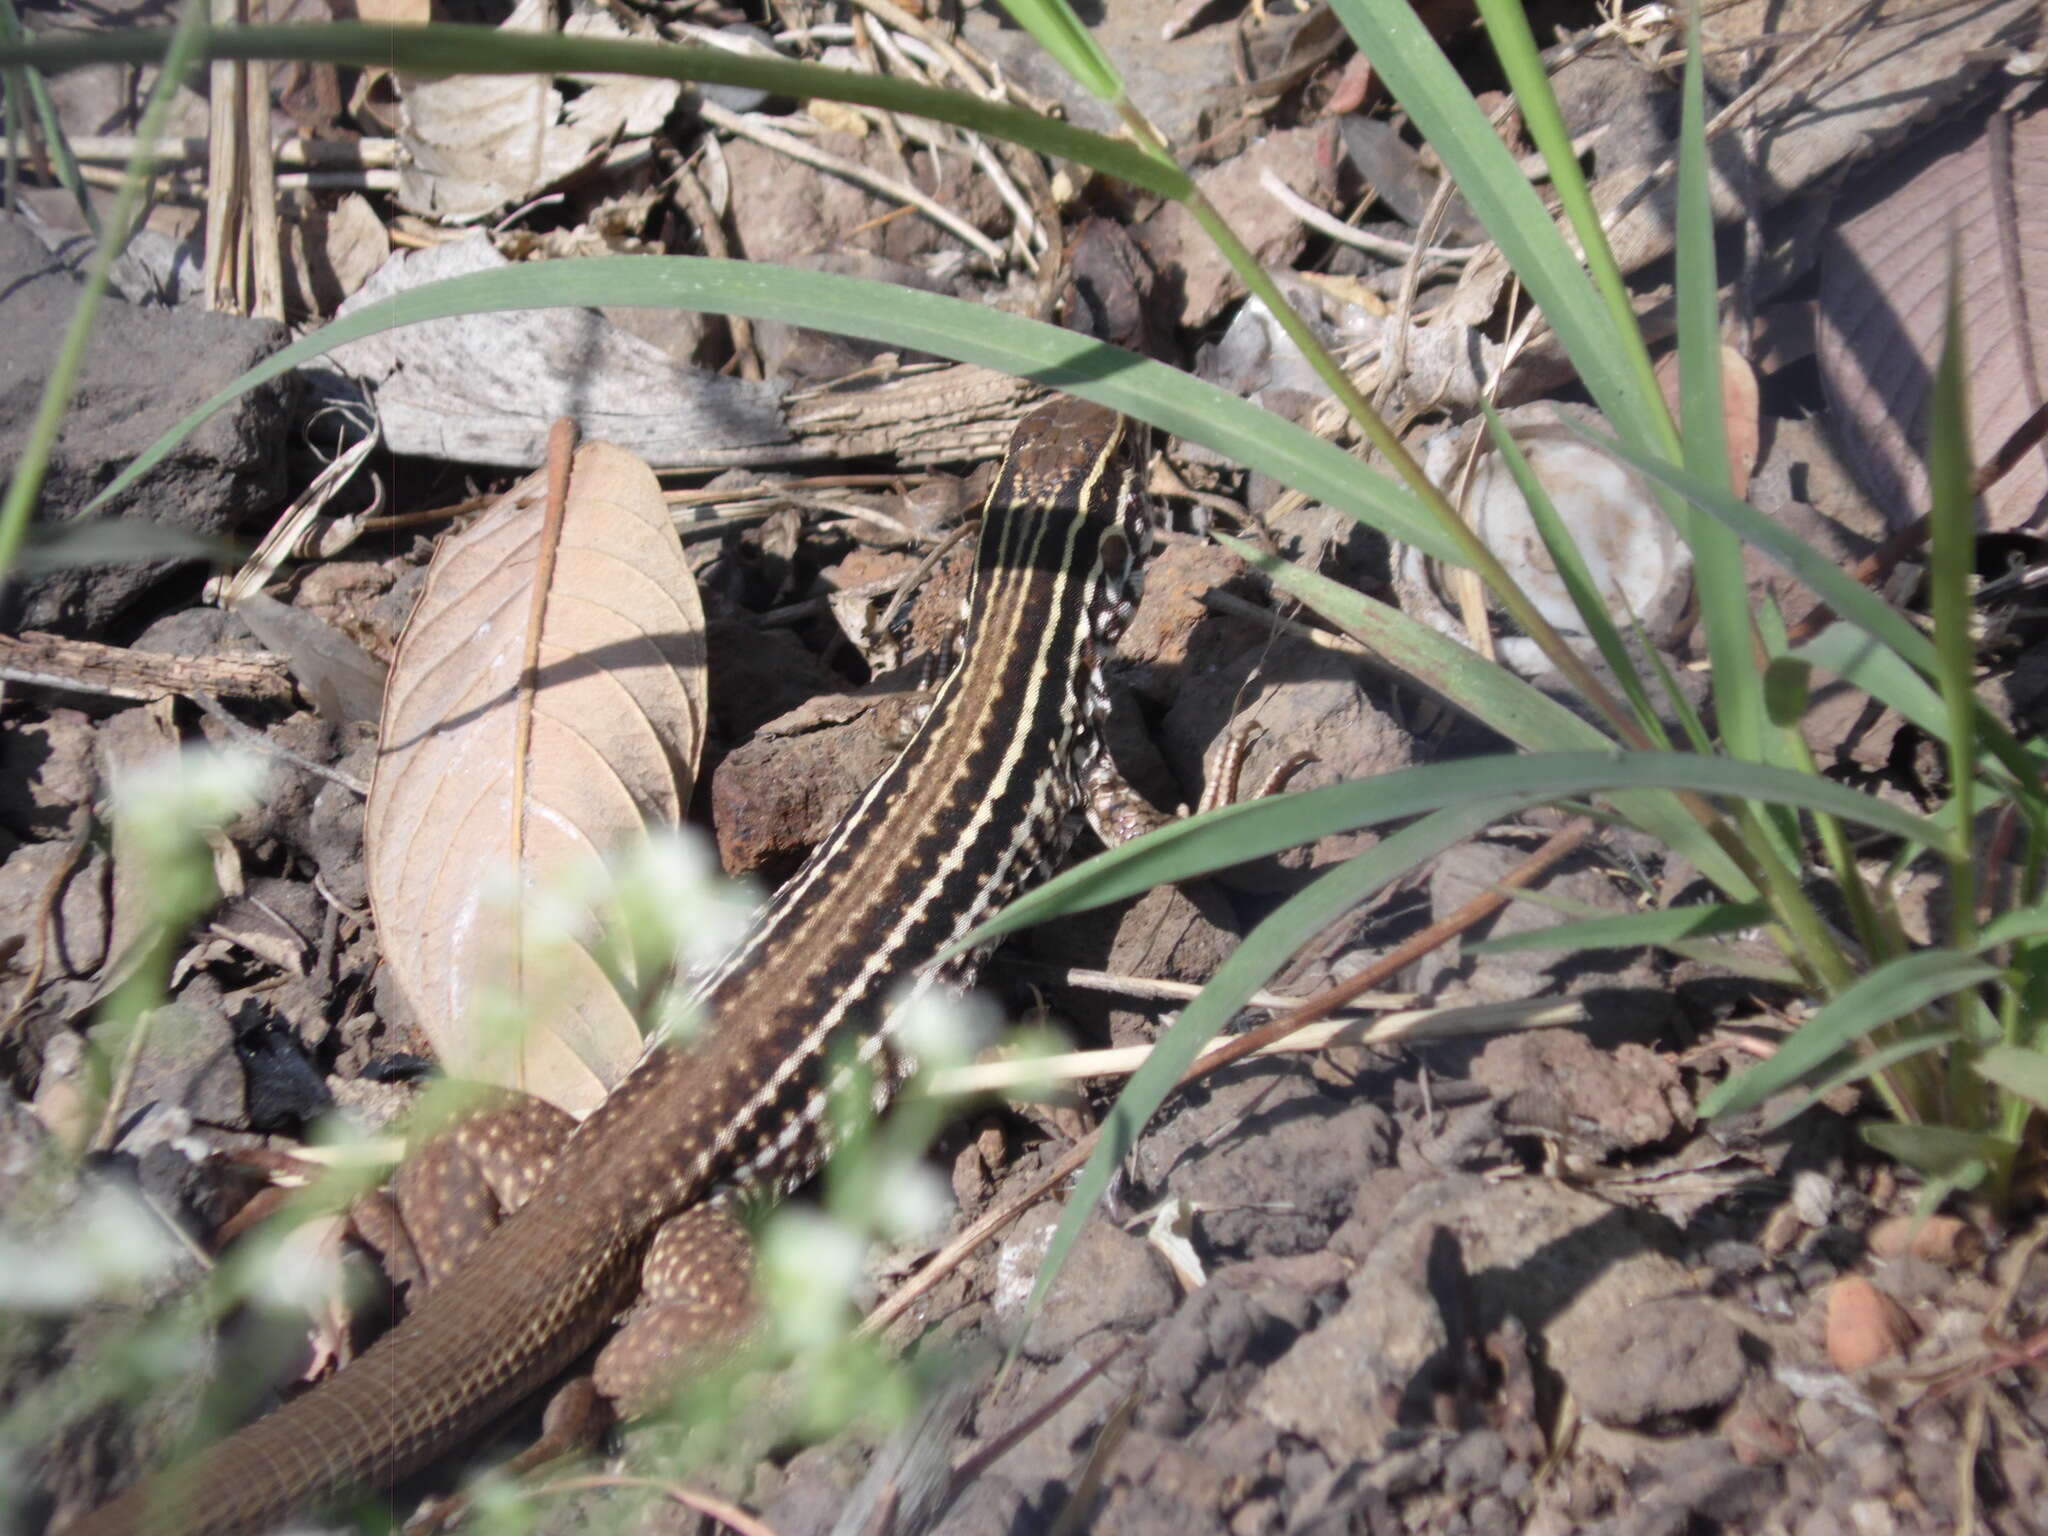 Image of Giant Whiptail